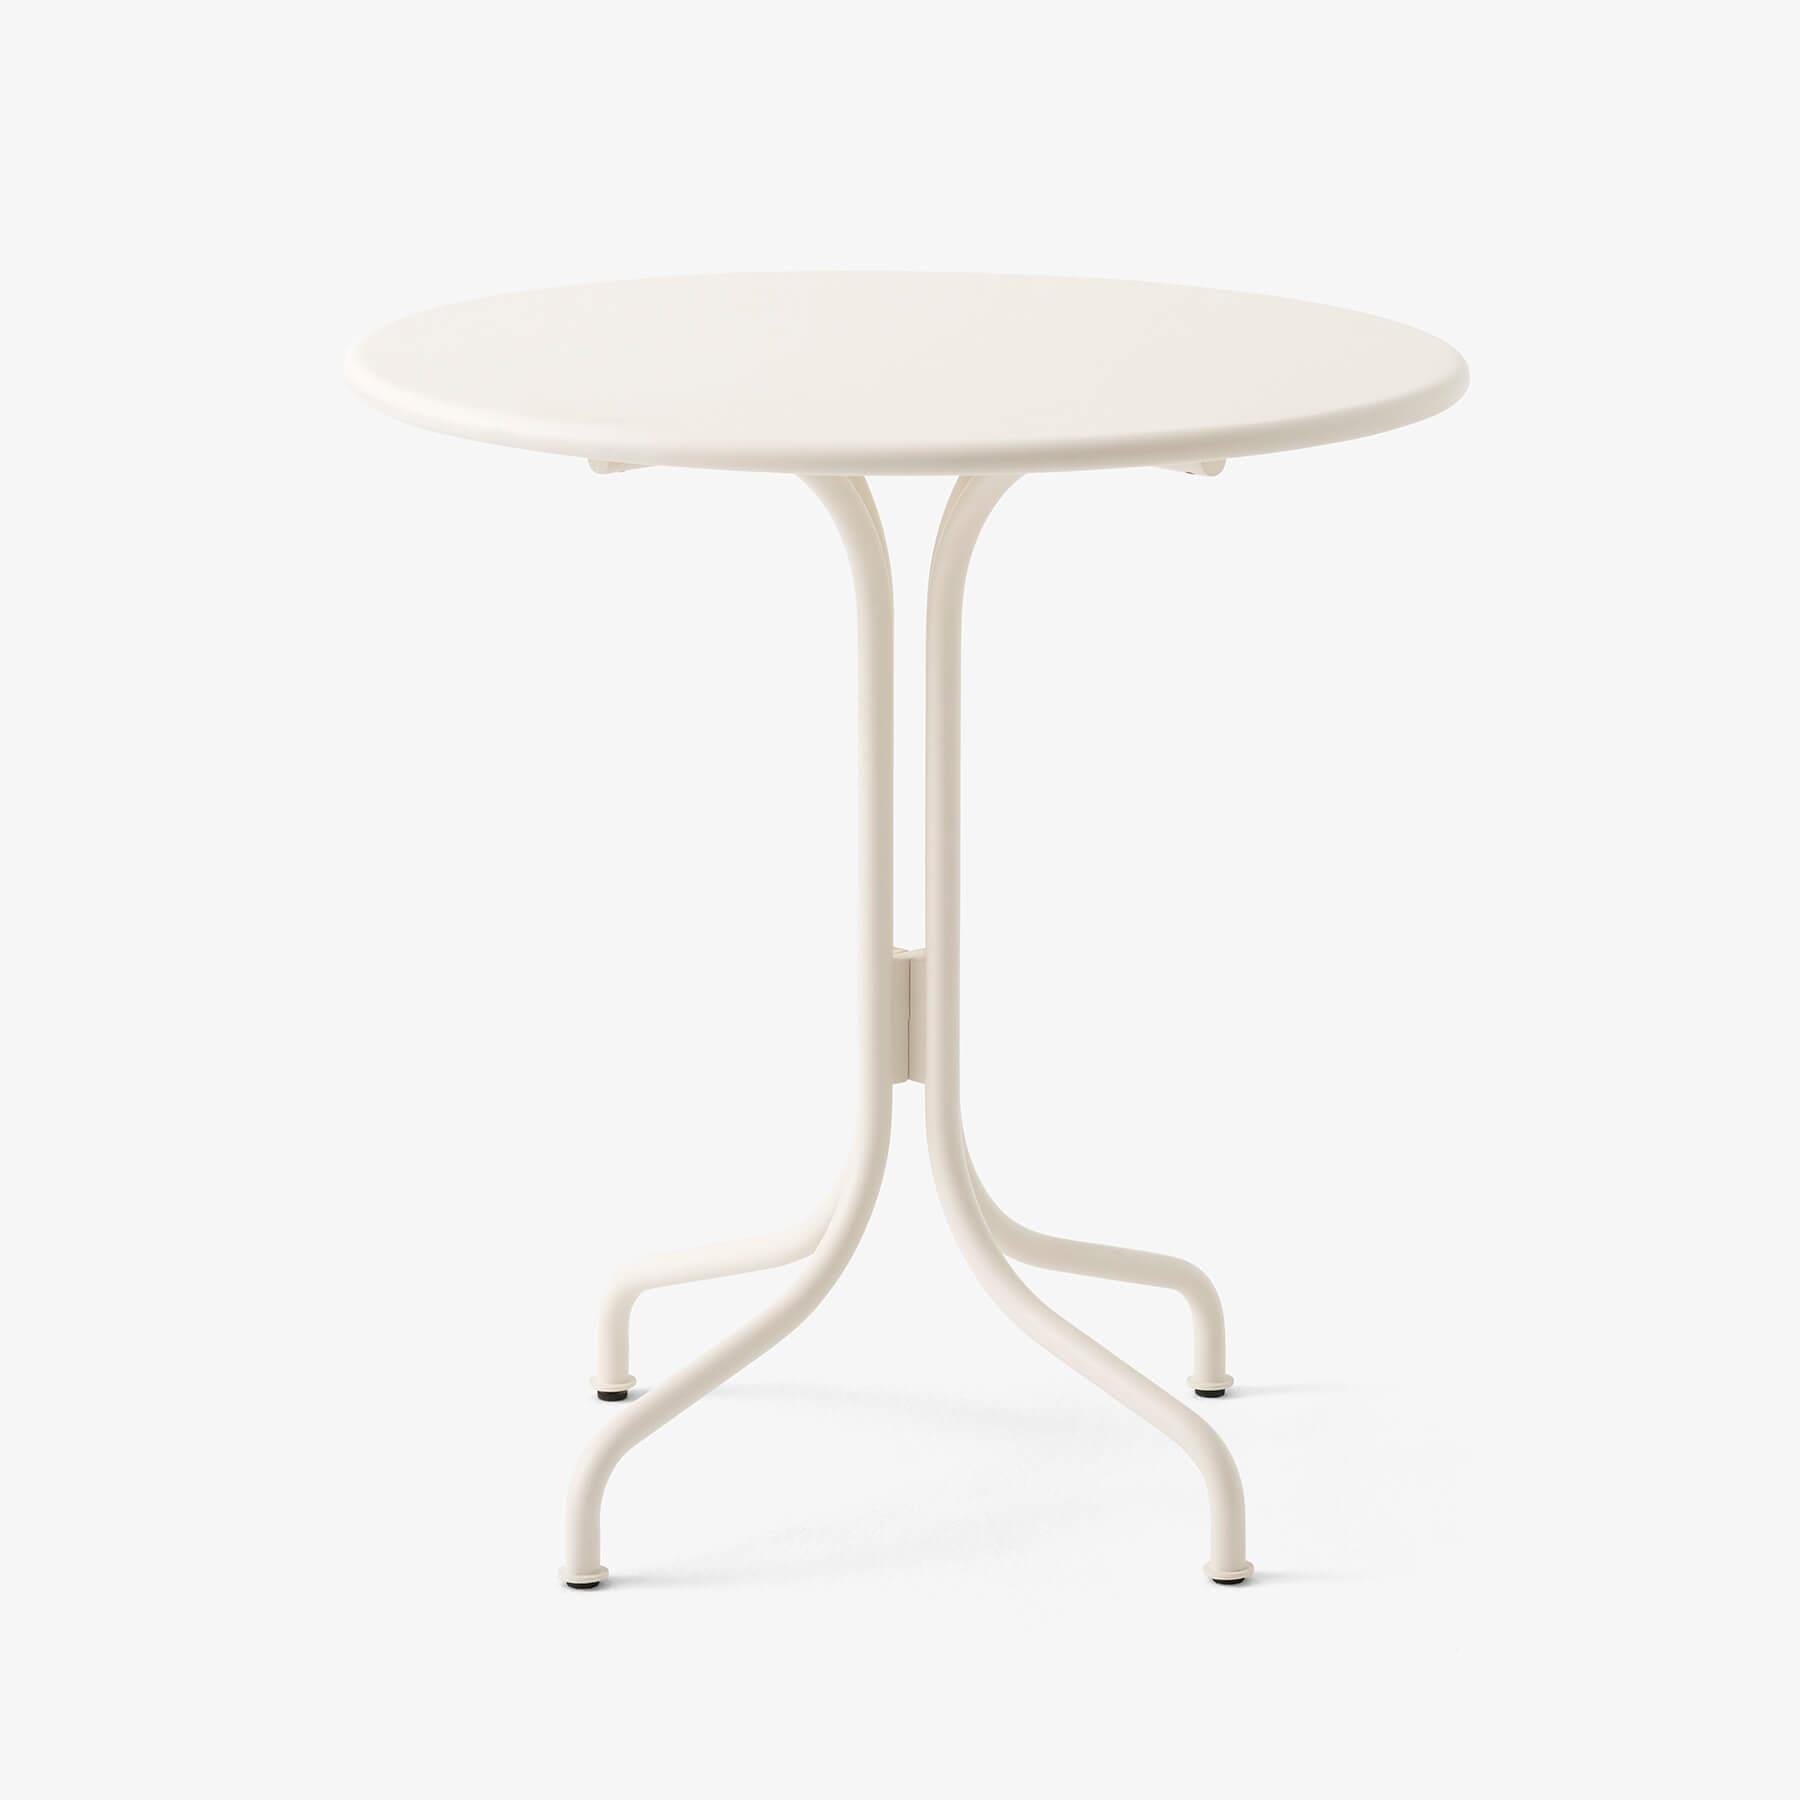 Tradition Sc96 Thorvald Space Copenhagen Outdoor Table Ivory White